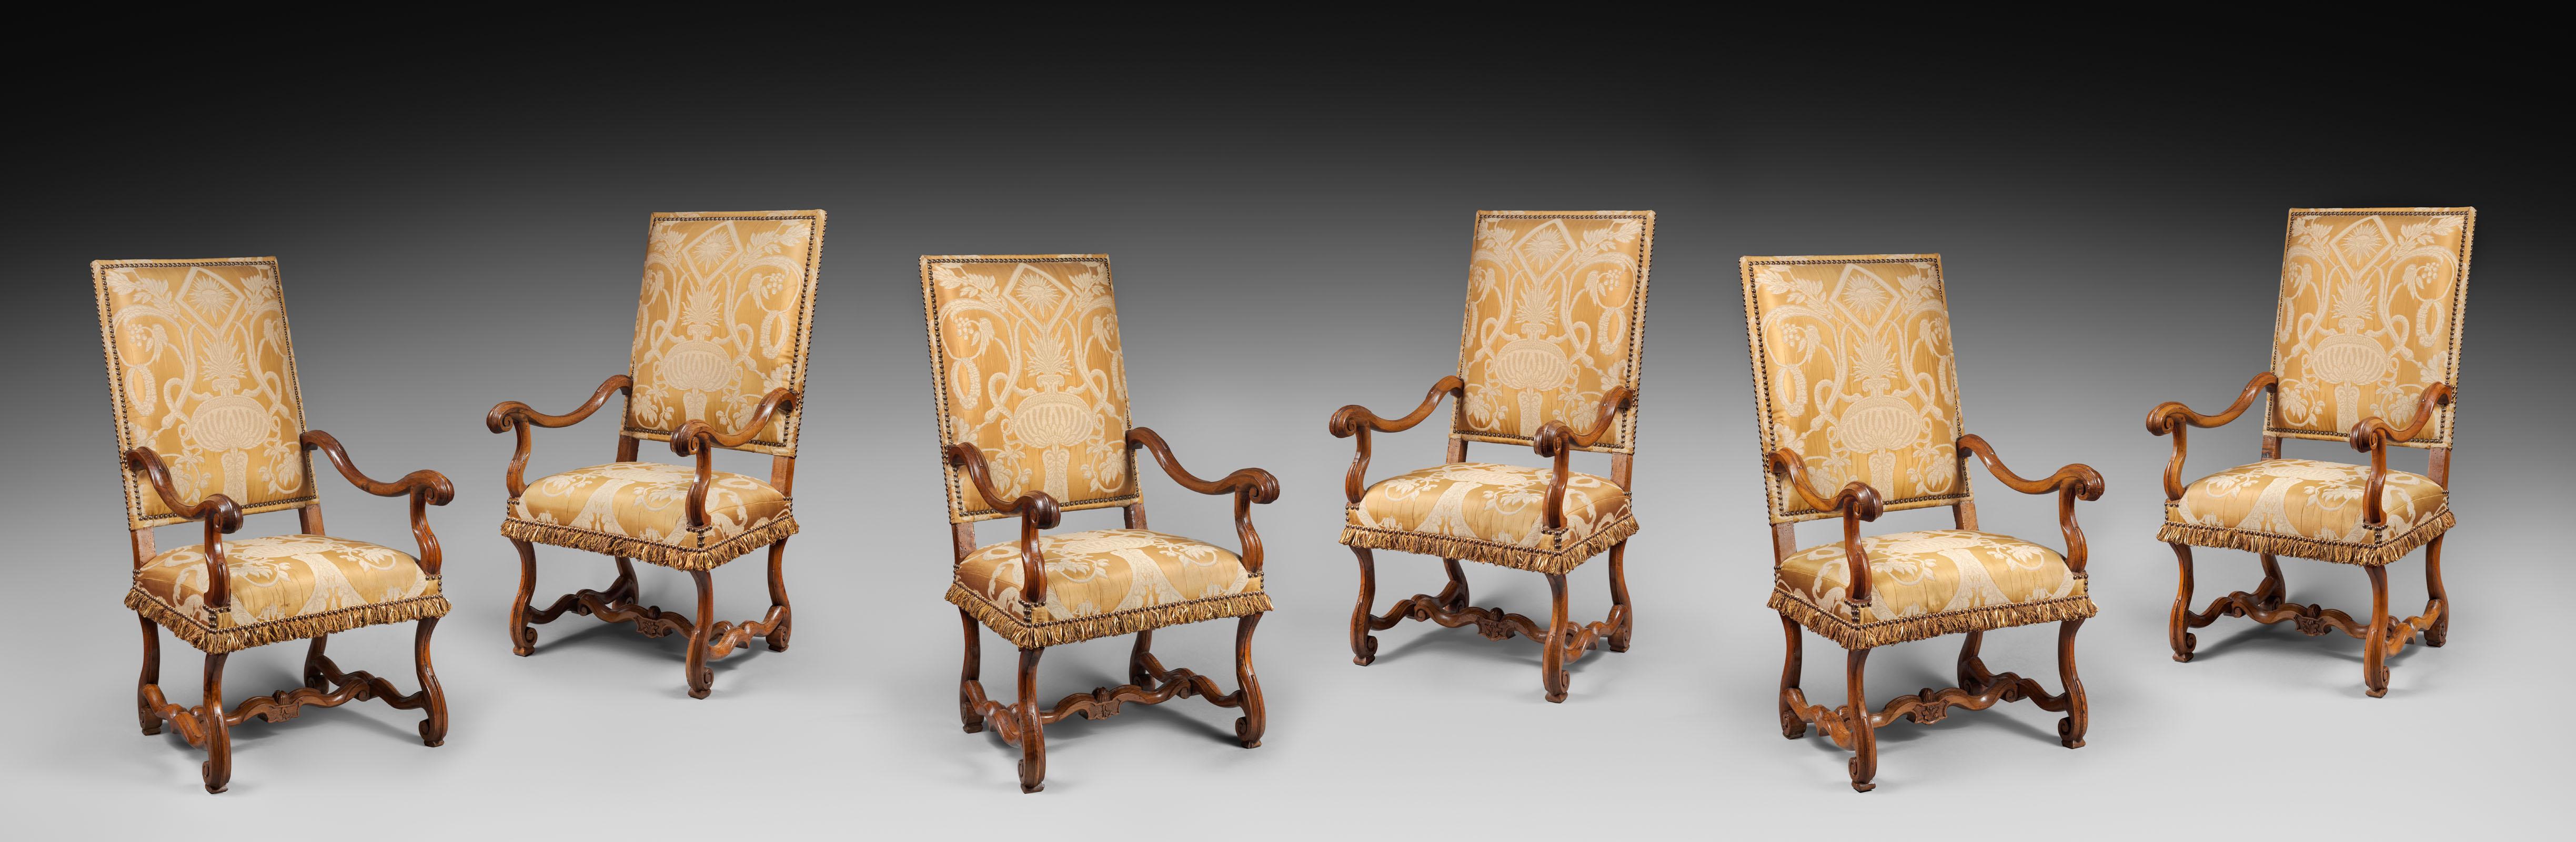 Set of six armchair from the Louis XIV period.

Period : 17th century
Origin : VAL-DE-LOIRE

Height : 120 cm
Width : 64 cm
Depth : 62.5 cm


Walnut wood
Good state of conservation

This exceptional suite of six walnut armchairs